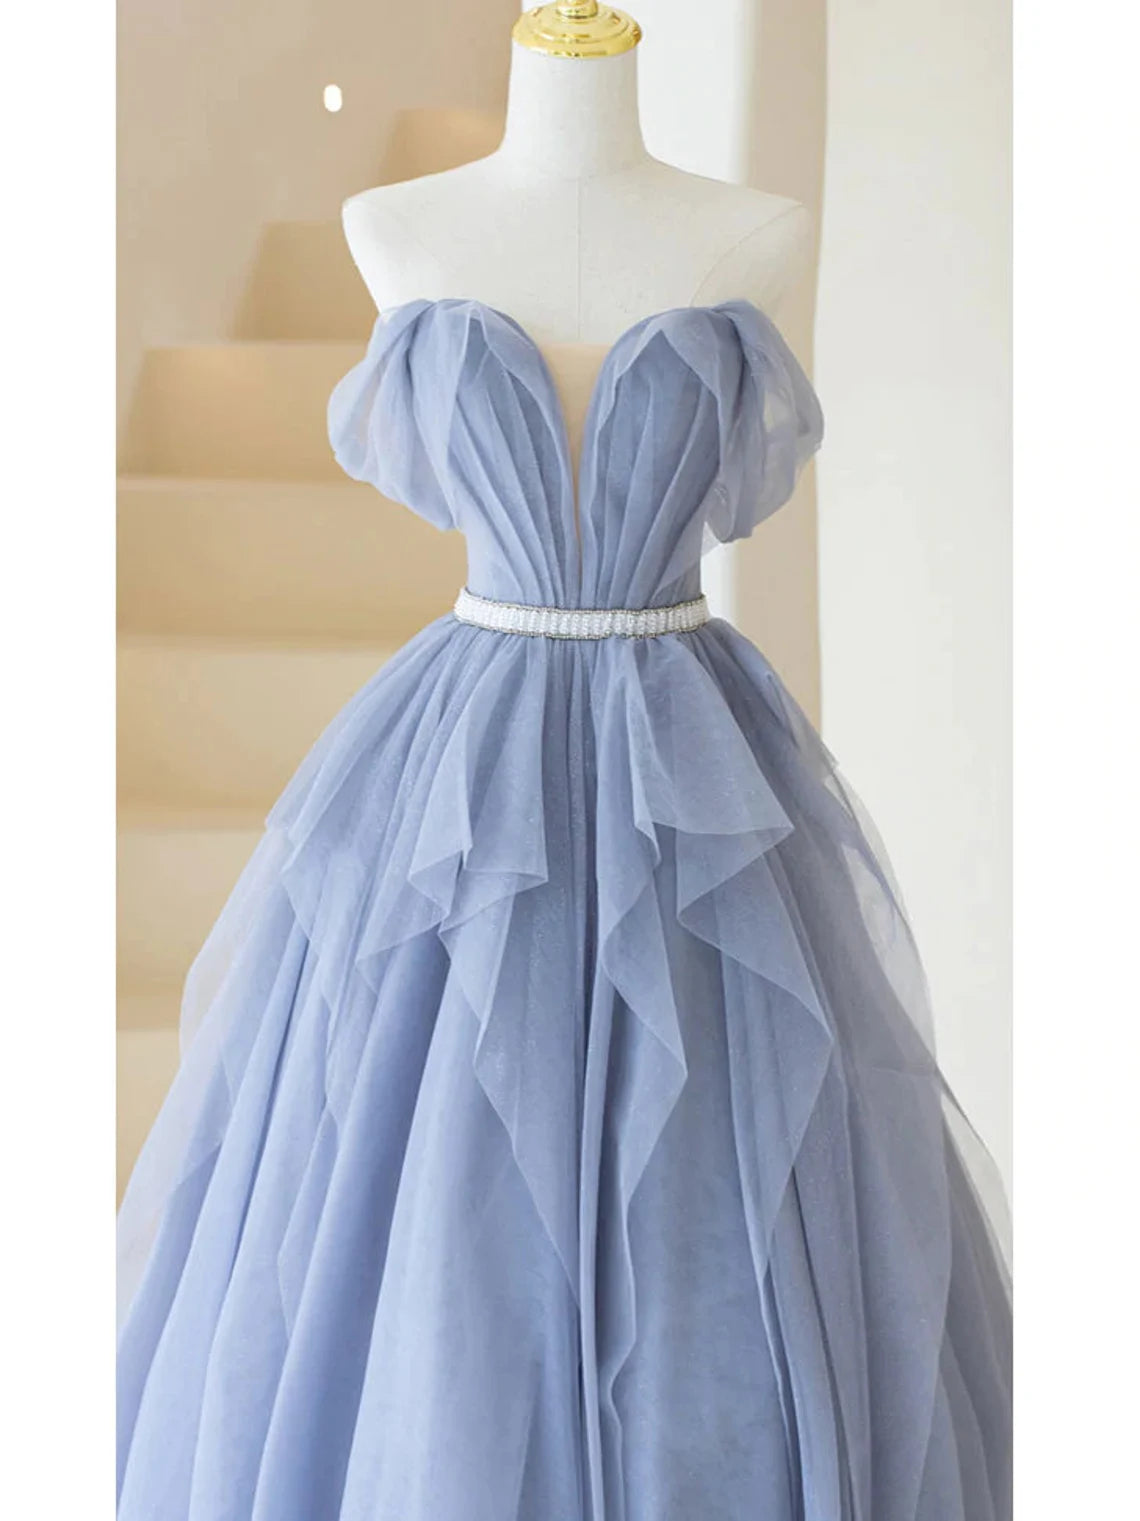 On Piece Dress, Blue Sweetheart Tulle Off-the-Shoulder Floor-Length Prom Dresses, Blue Evening Gown